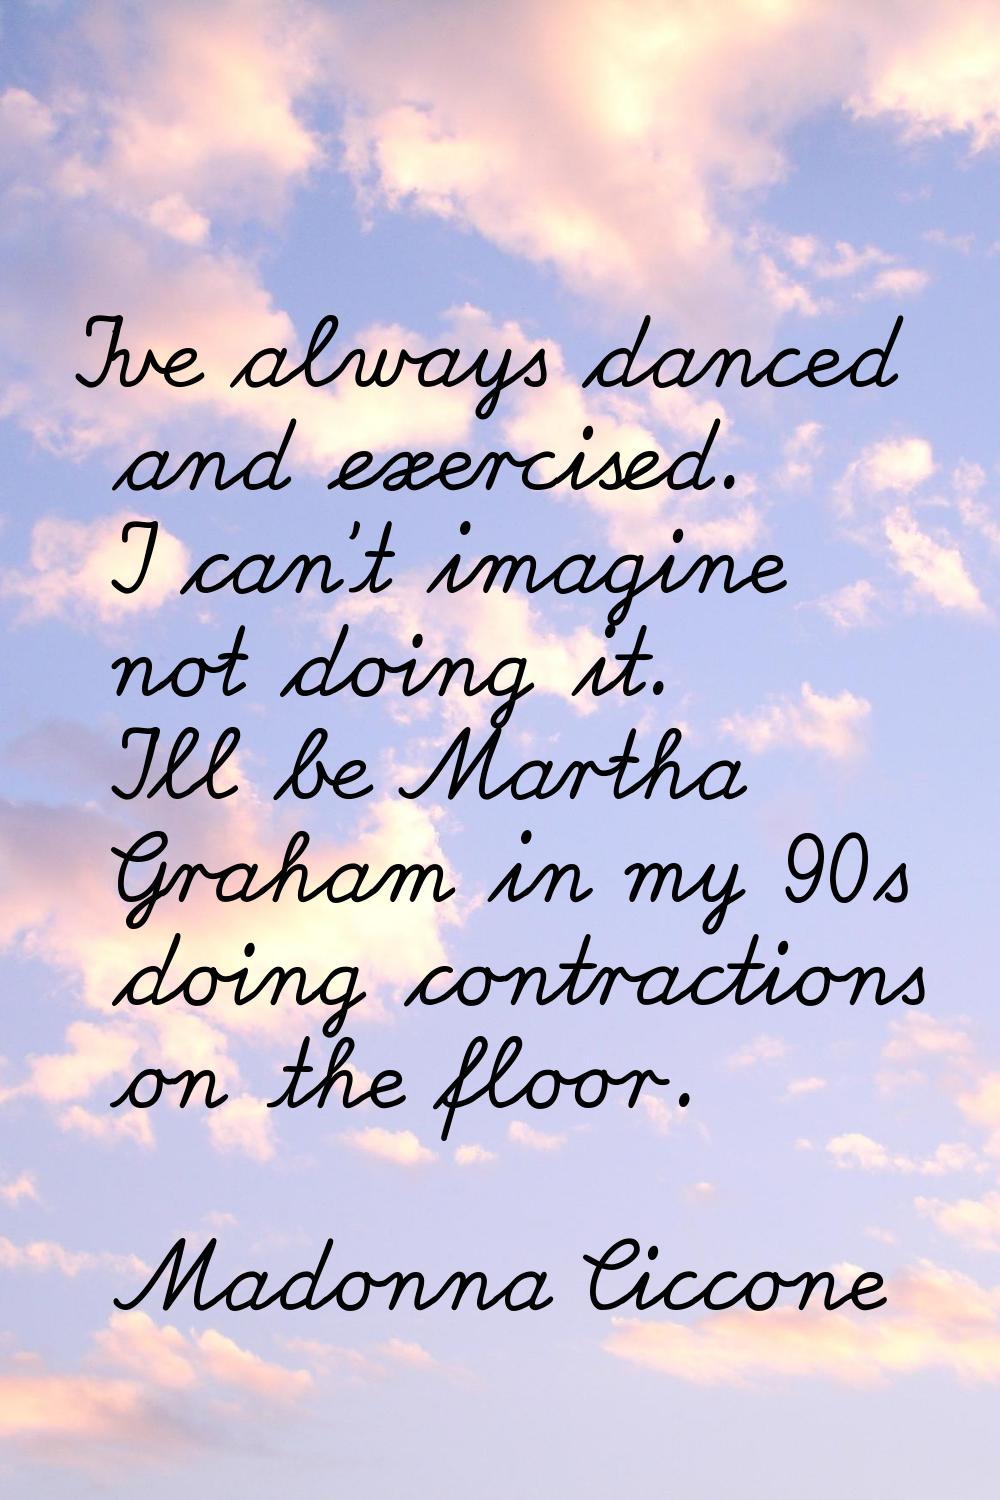 I've always danced and exercised. I can't imagine not doing it. I'll be Martha Graham in my 90s doi